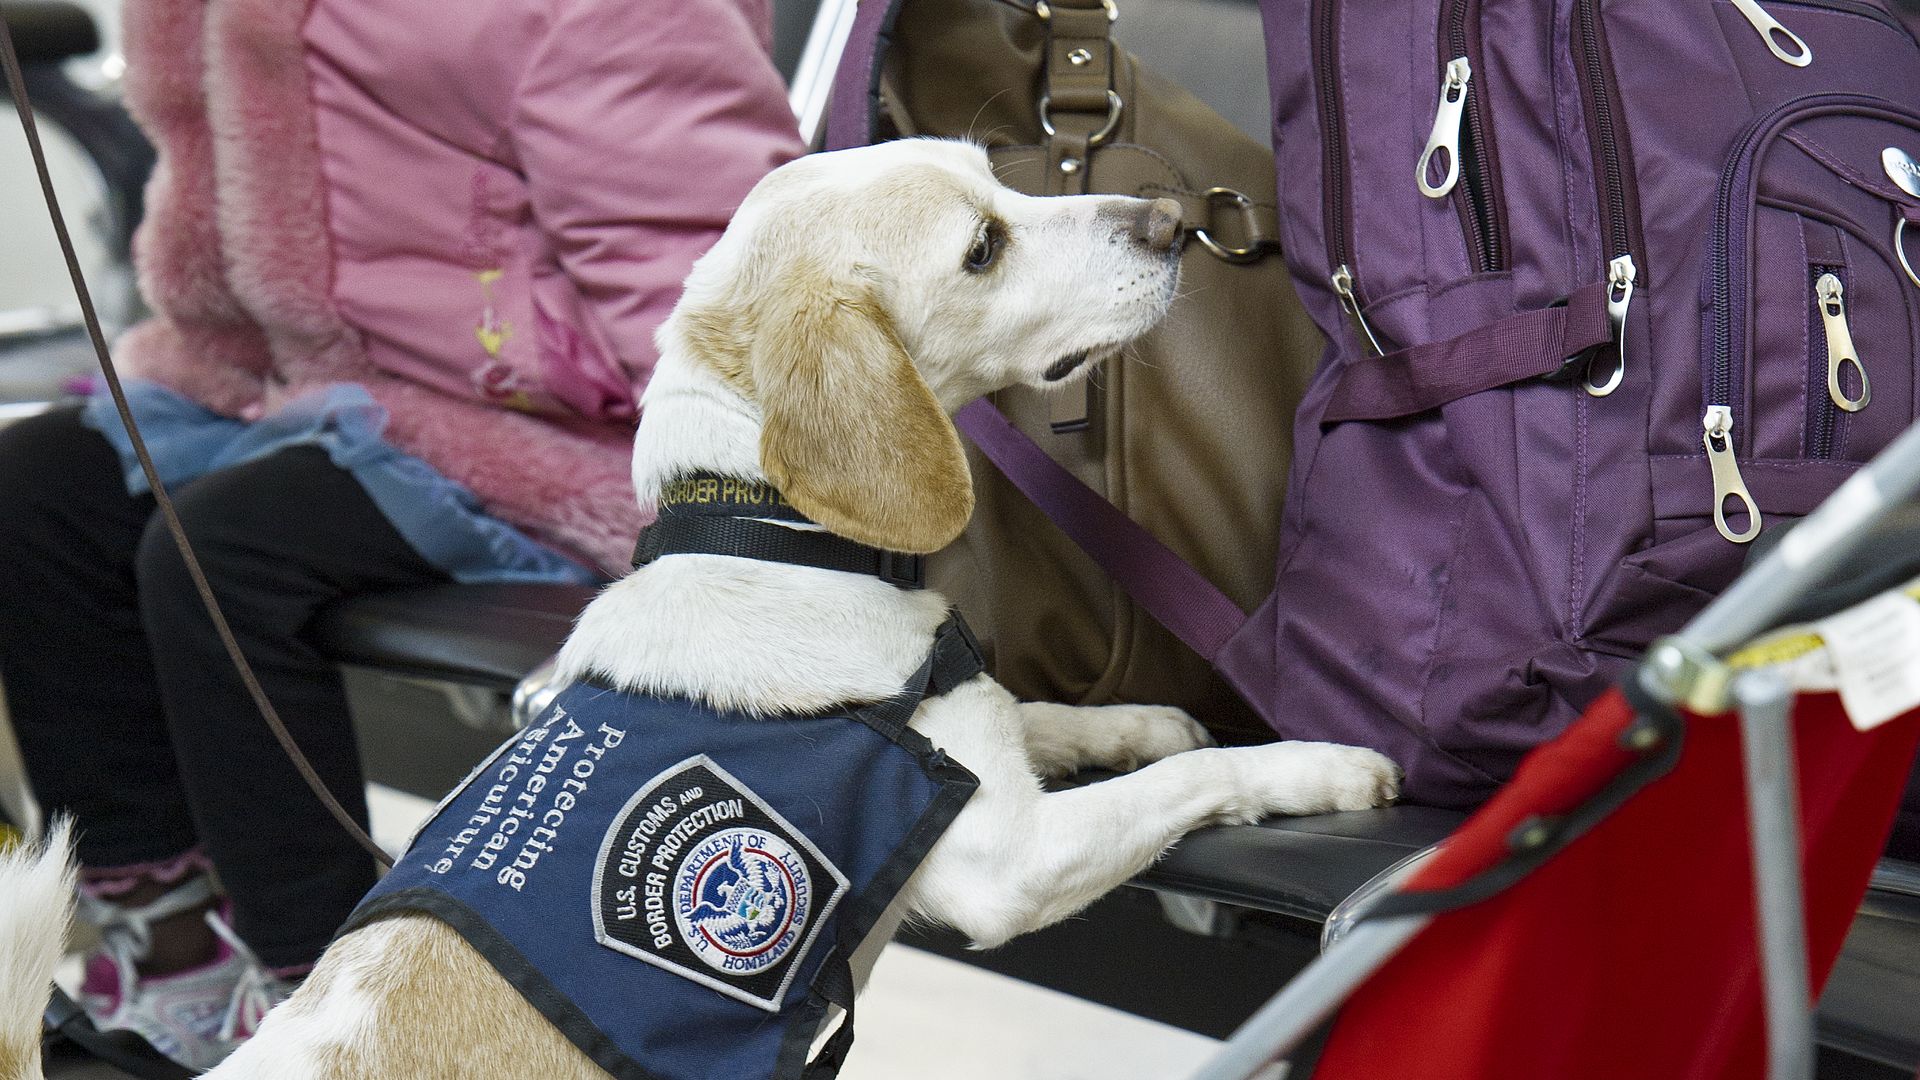 A airport security beagle sniffing luggage.